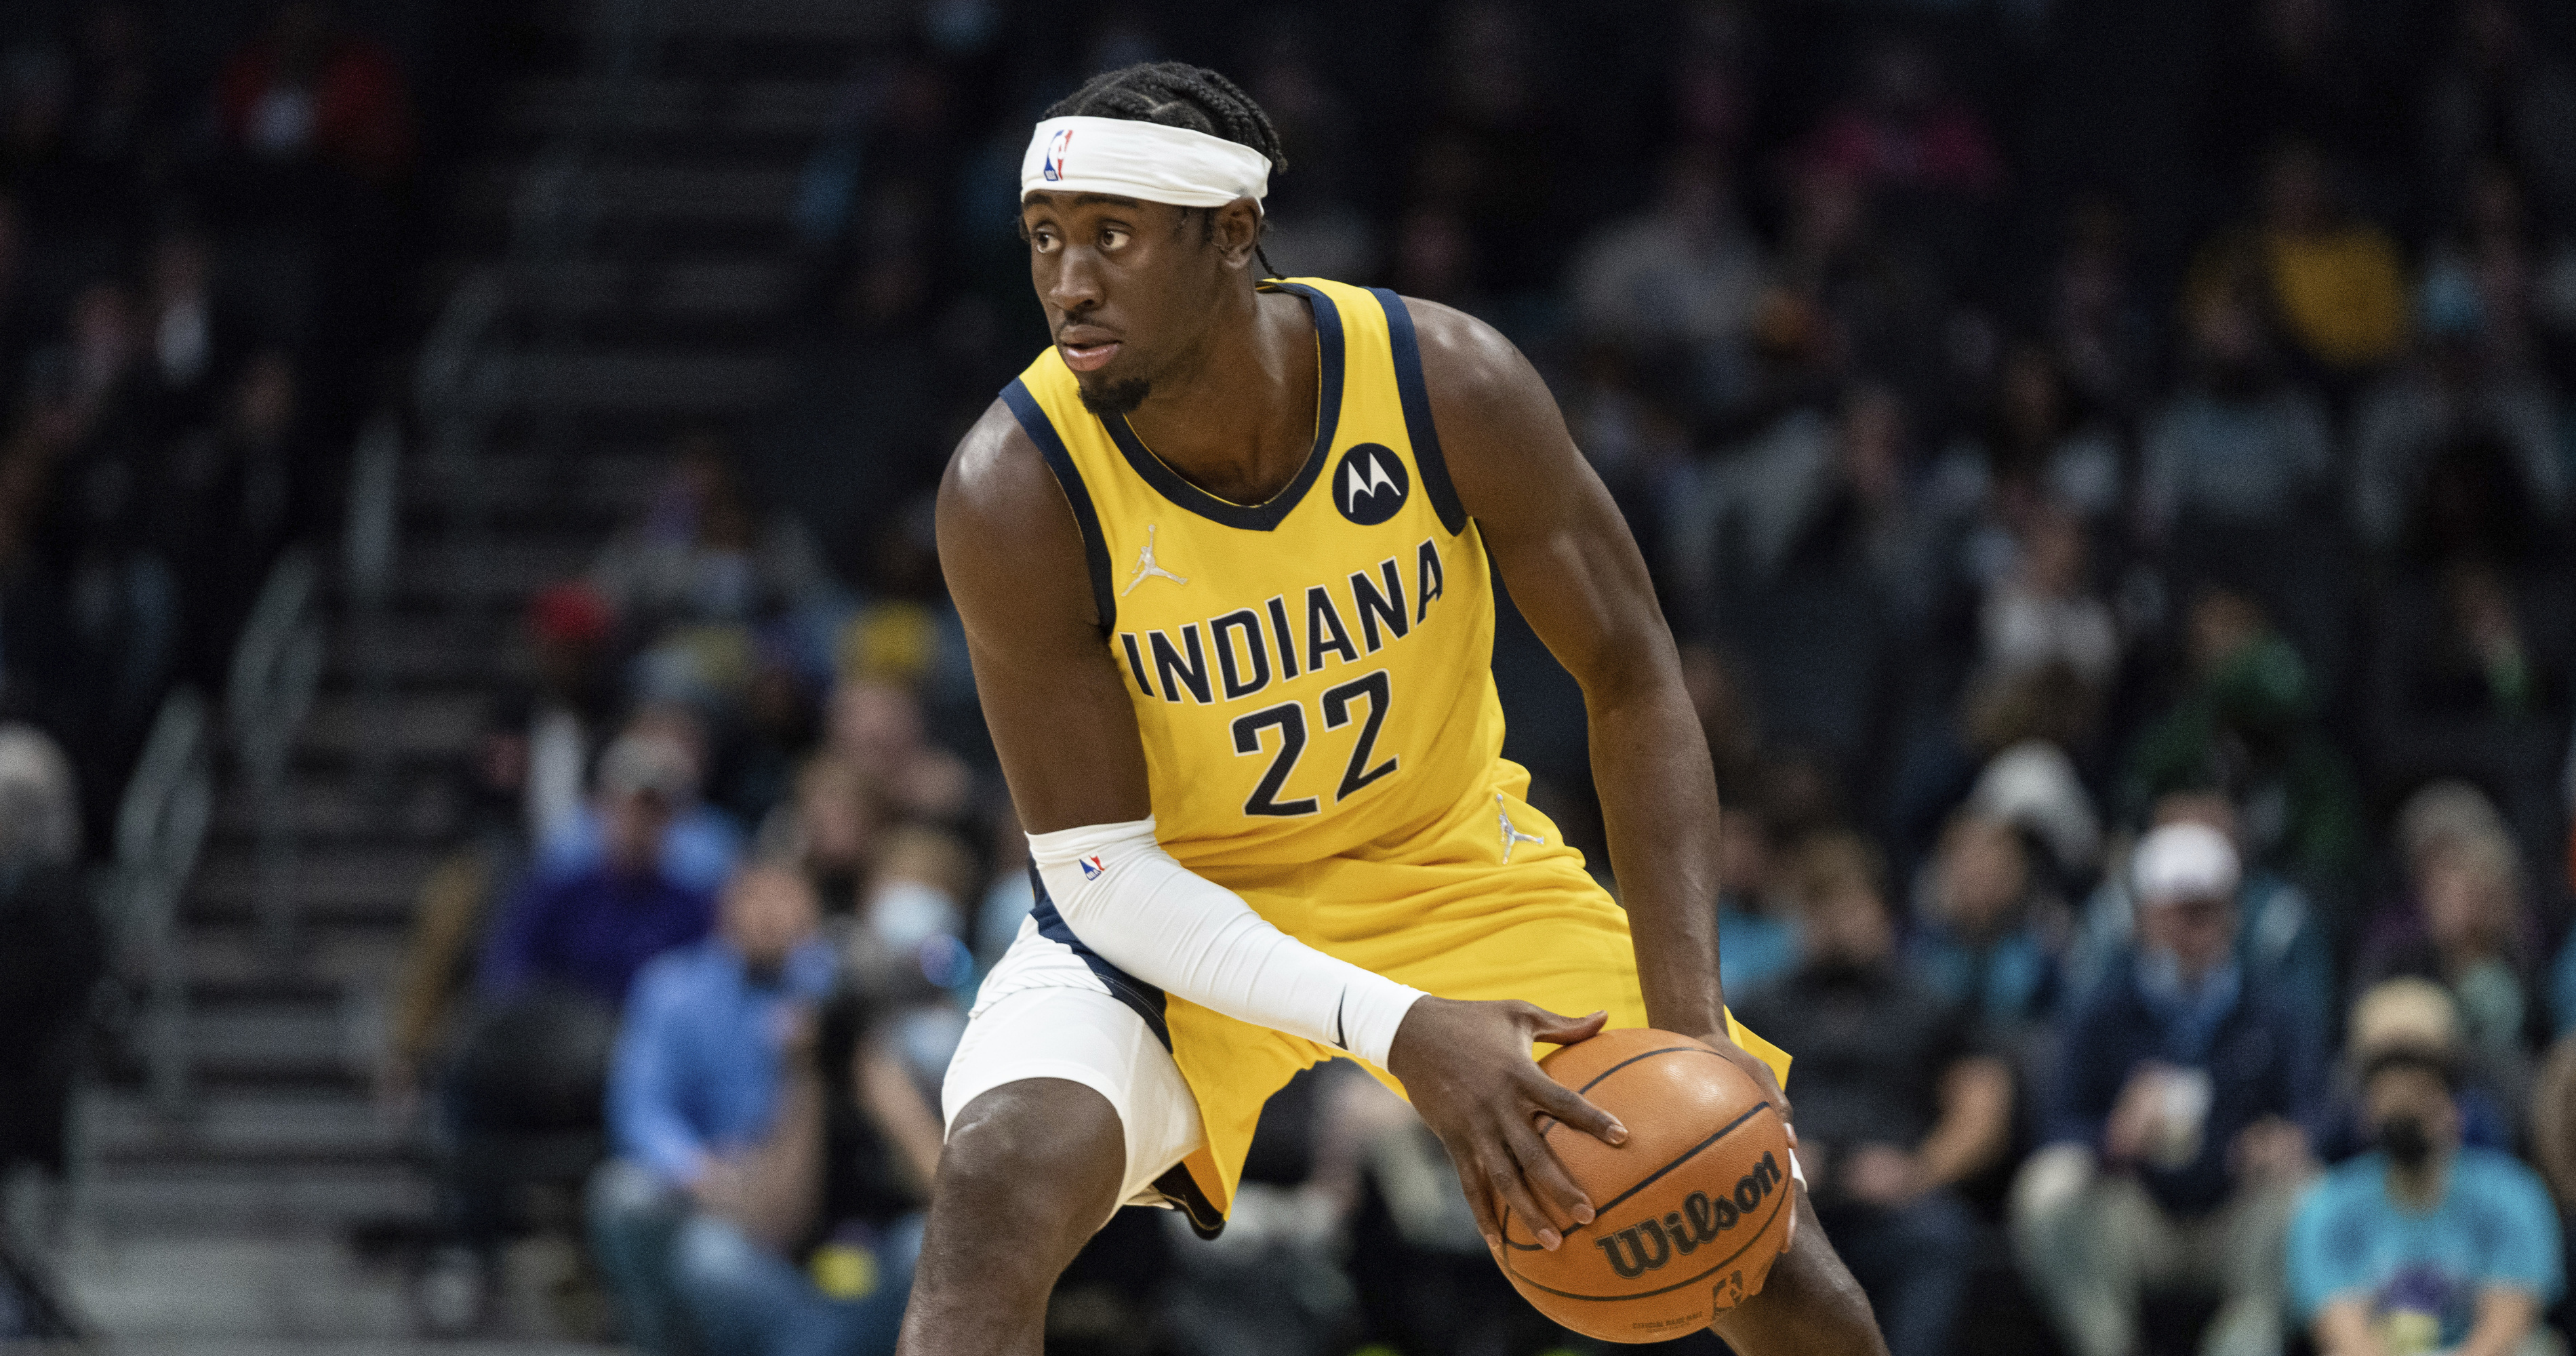 Caris LeVert Helps Cleveland Cavaliers Burn His Old Indy Team After Trade